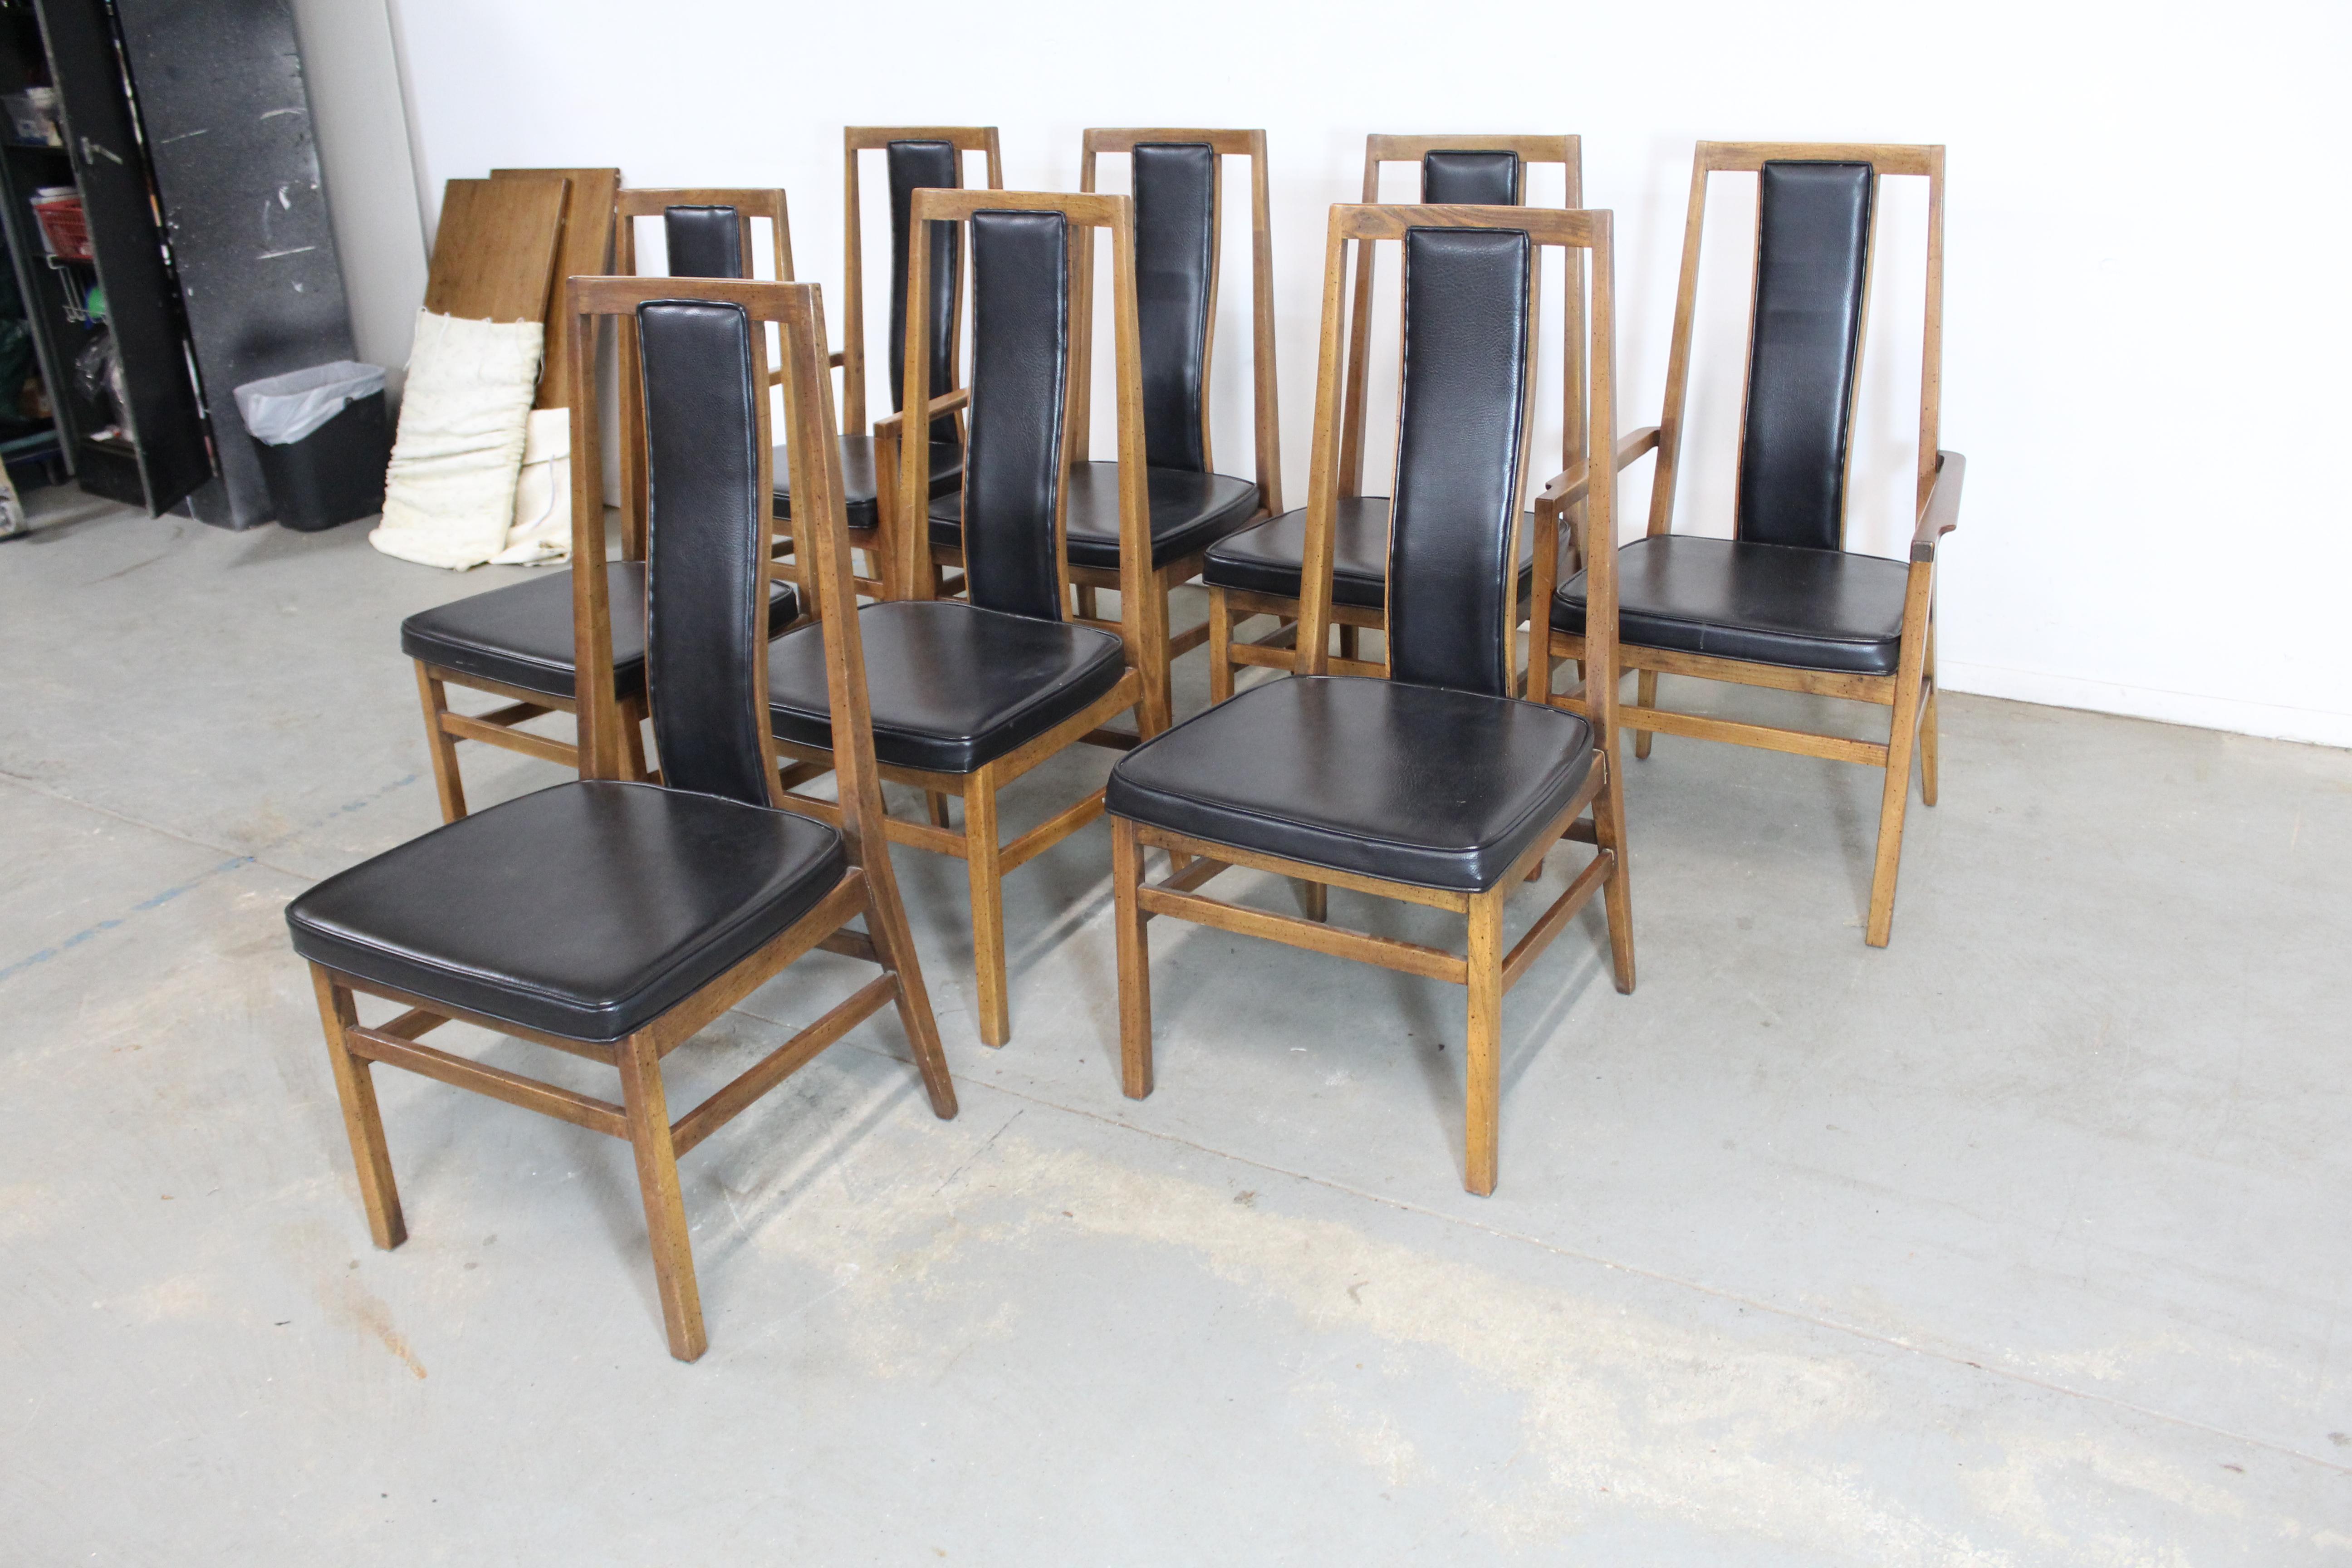 20th Century Set of 8 Mid-Century Modern Tall Back Dining Chairs by Founders